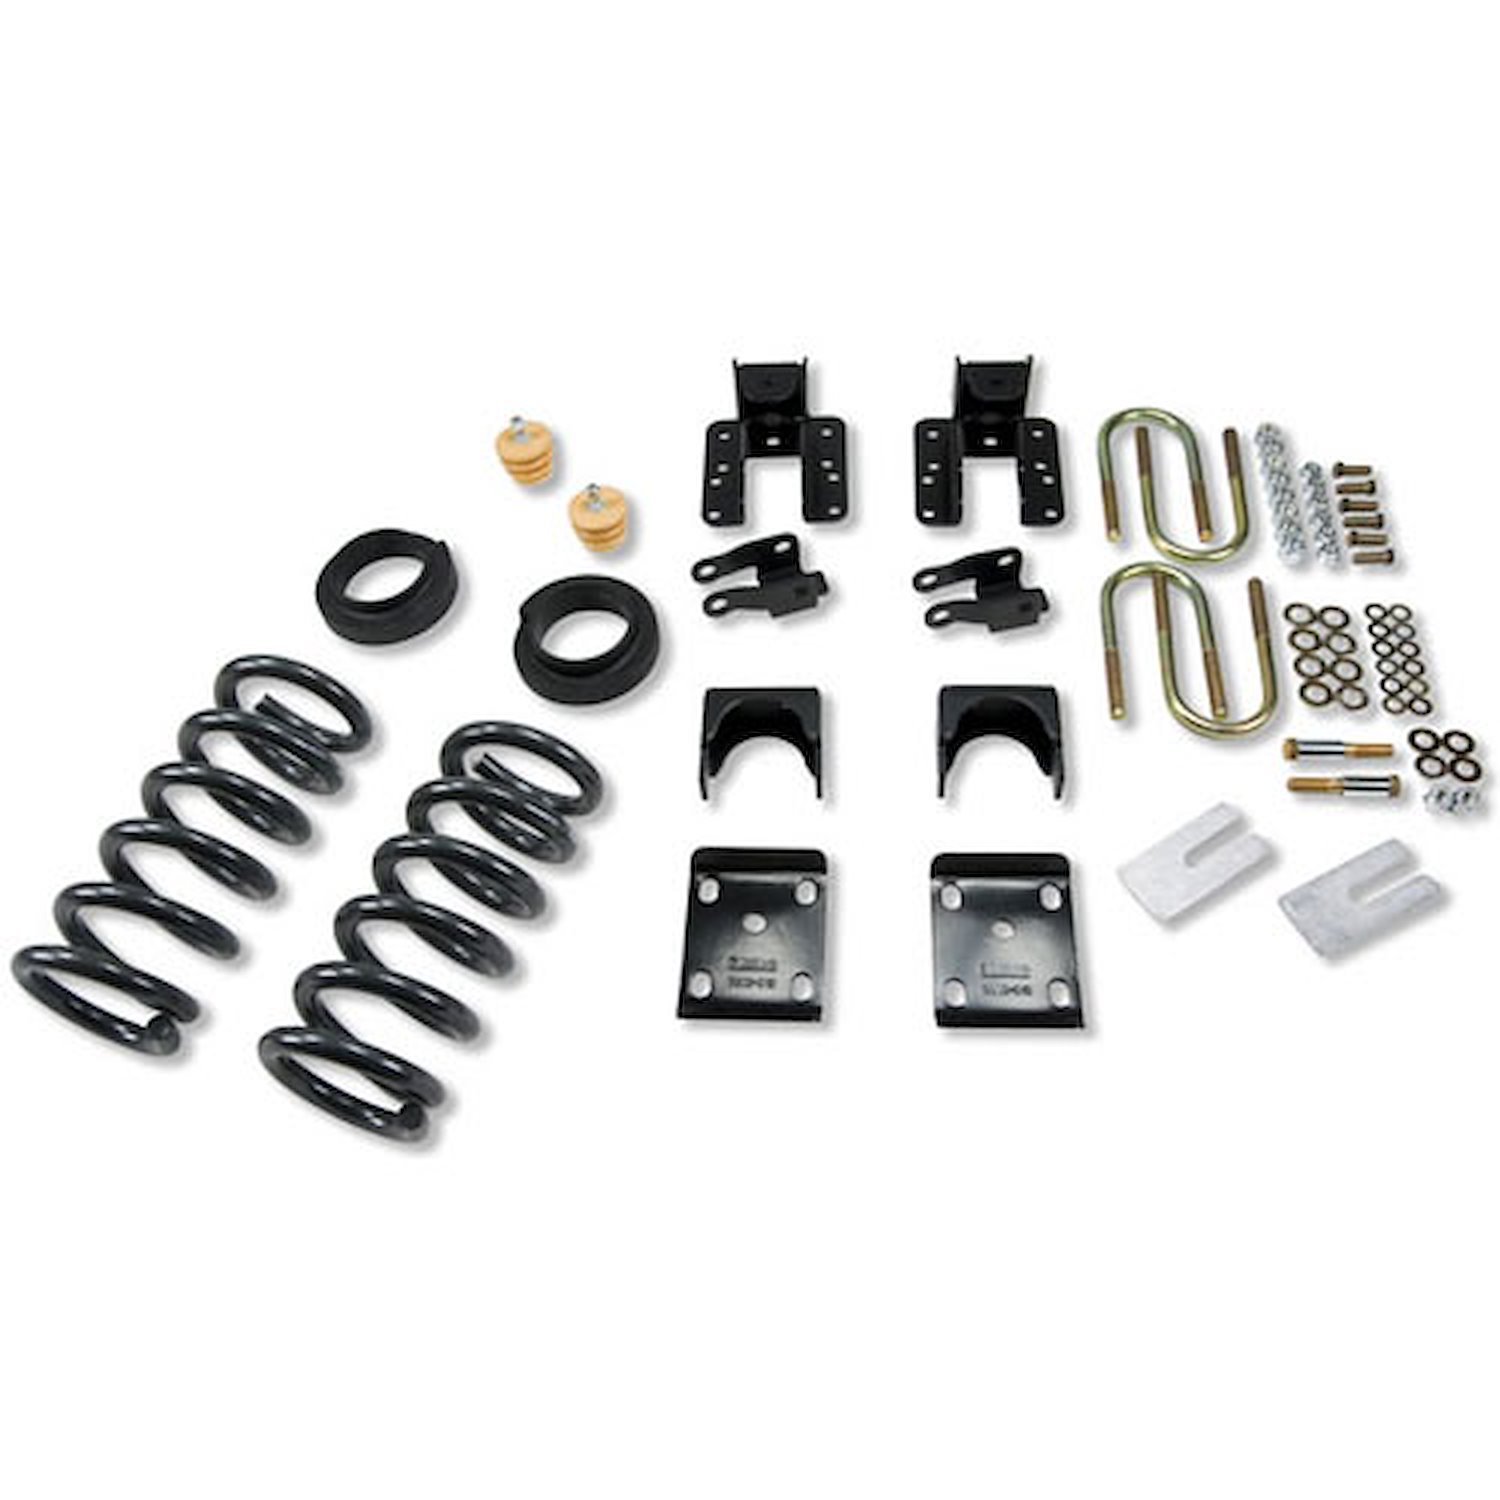 Complete Lowering Kit for 2004-2006 Chevy Silverado/GMC Sierra 1500 Crew Cab